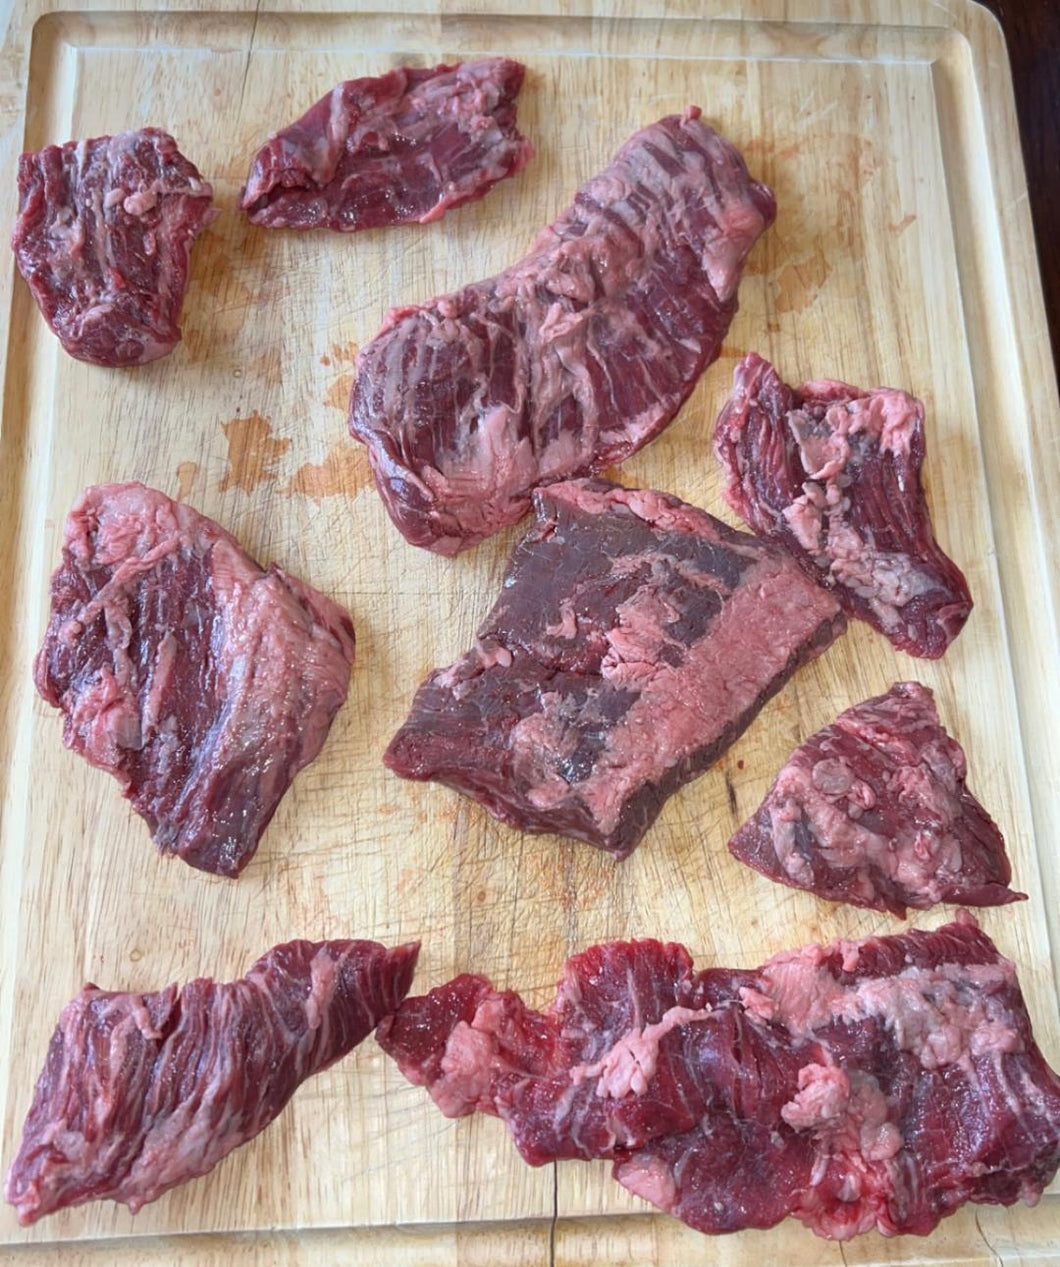 Outer Skirt Pieces, USDA Choice Angus Beef, Peeled & Pinned - Martinelli Meats LLC